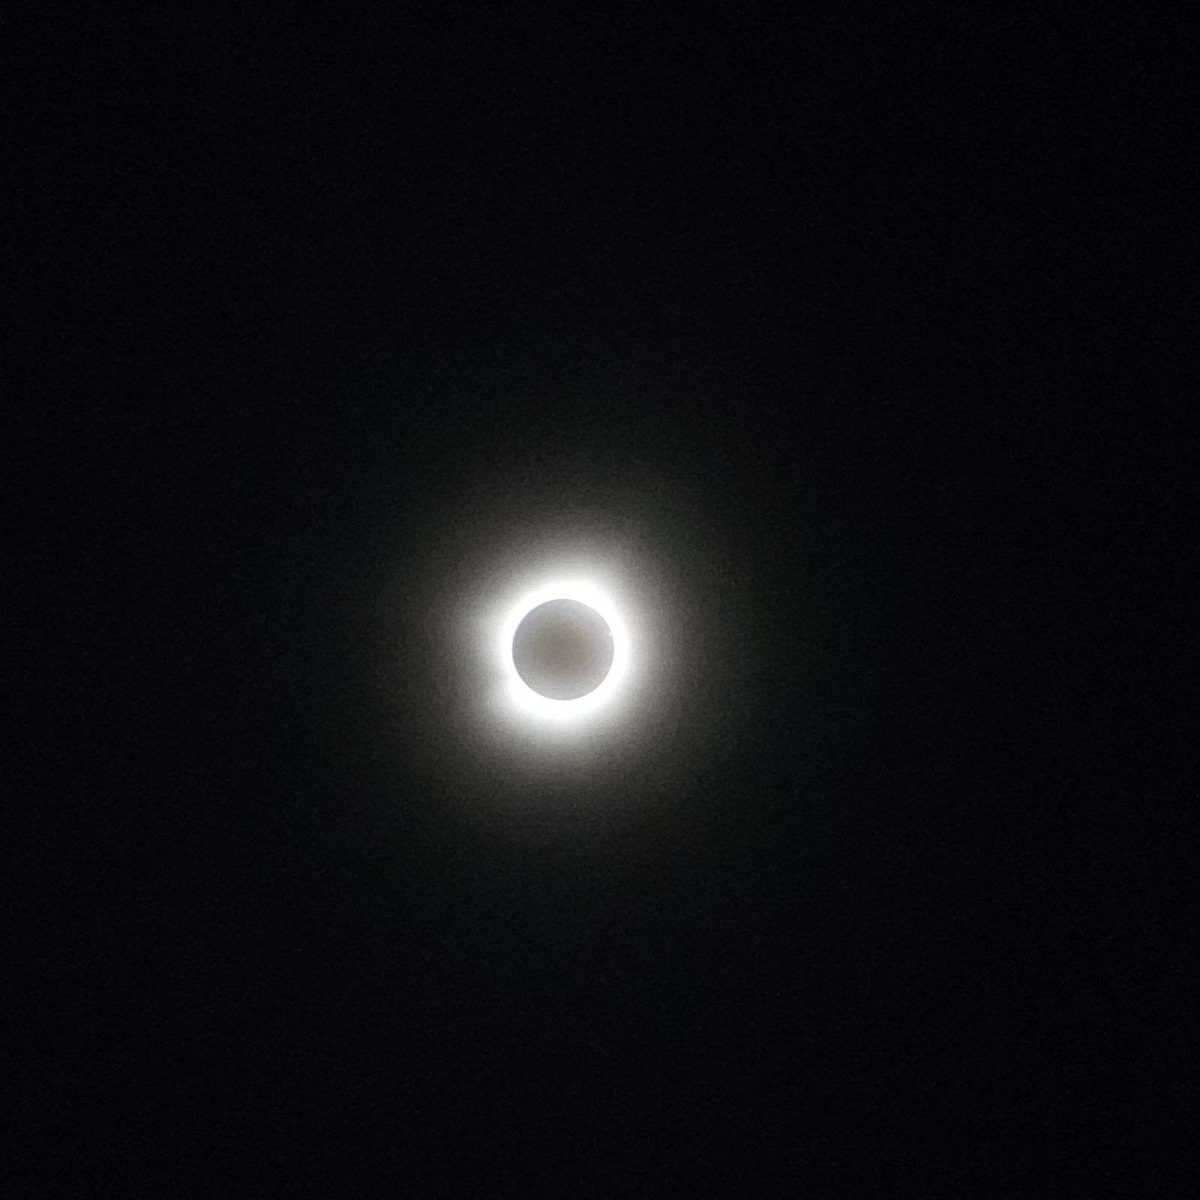 The Solar Eclipse at 1:50 p.m. in Clarkson, AR.